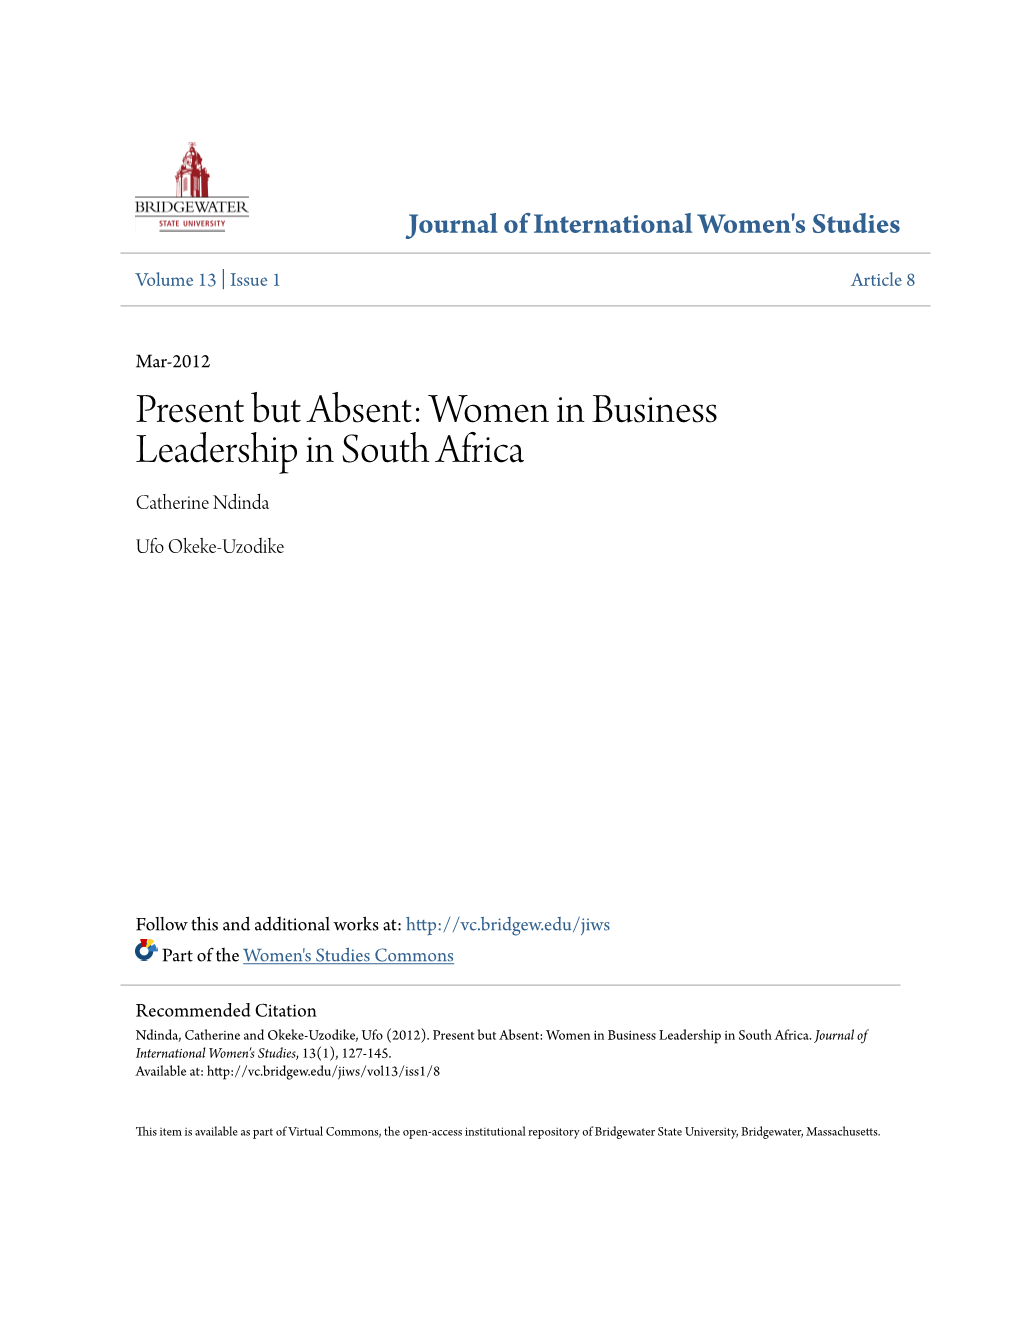 Present but Absent: Women in Business Leadership in South Africa Catherine Ndinda